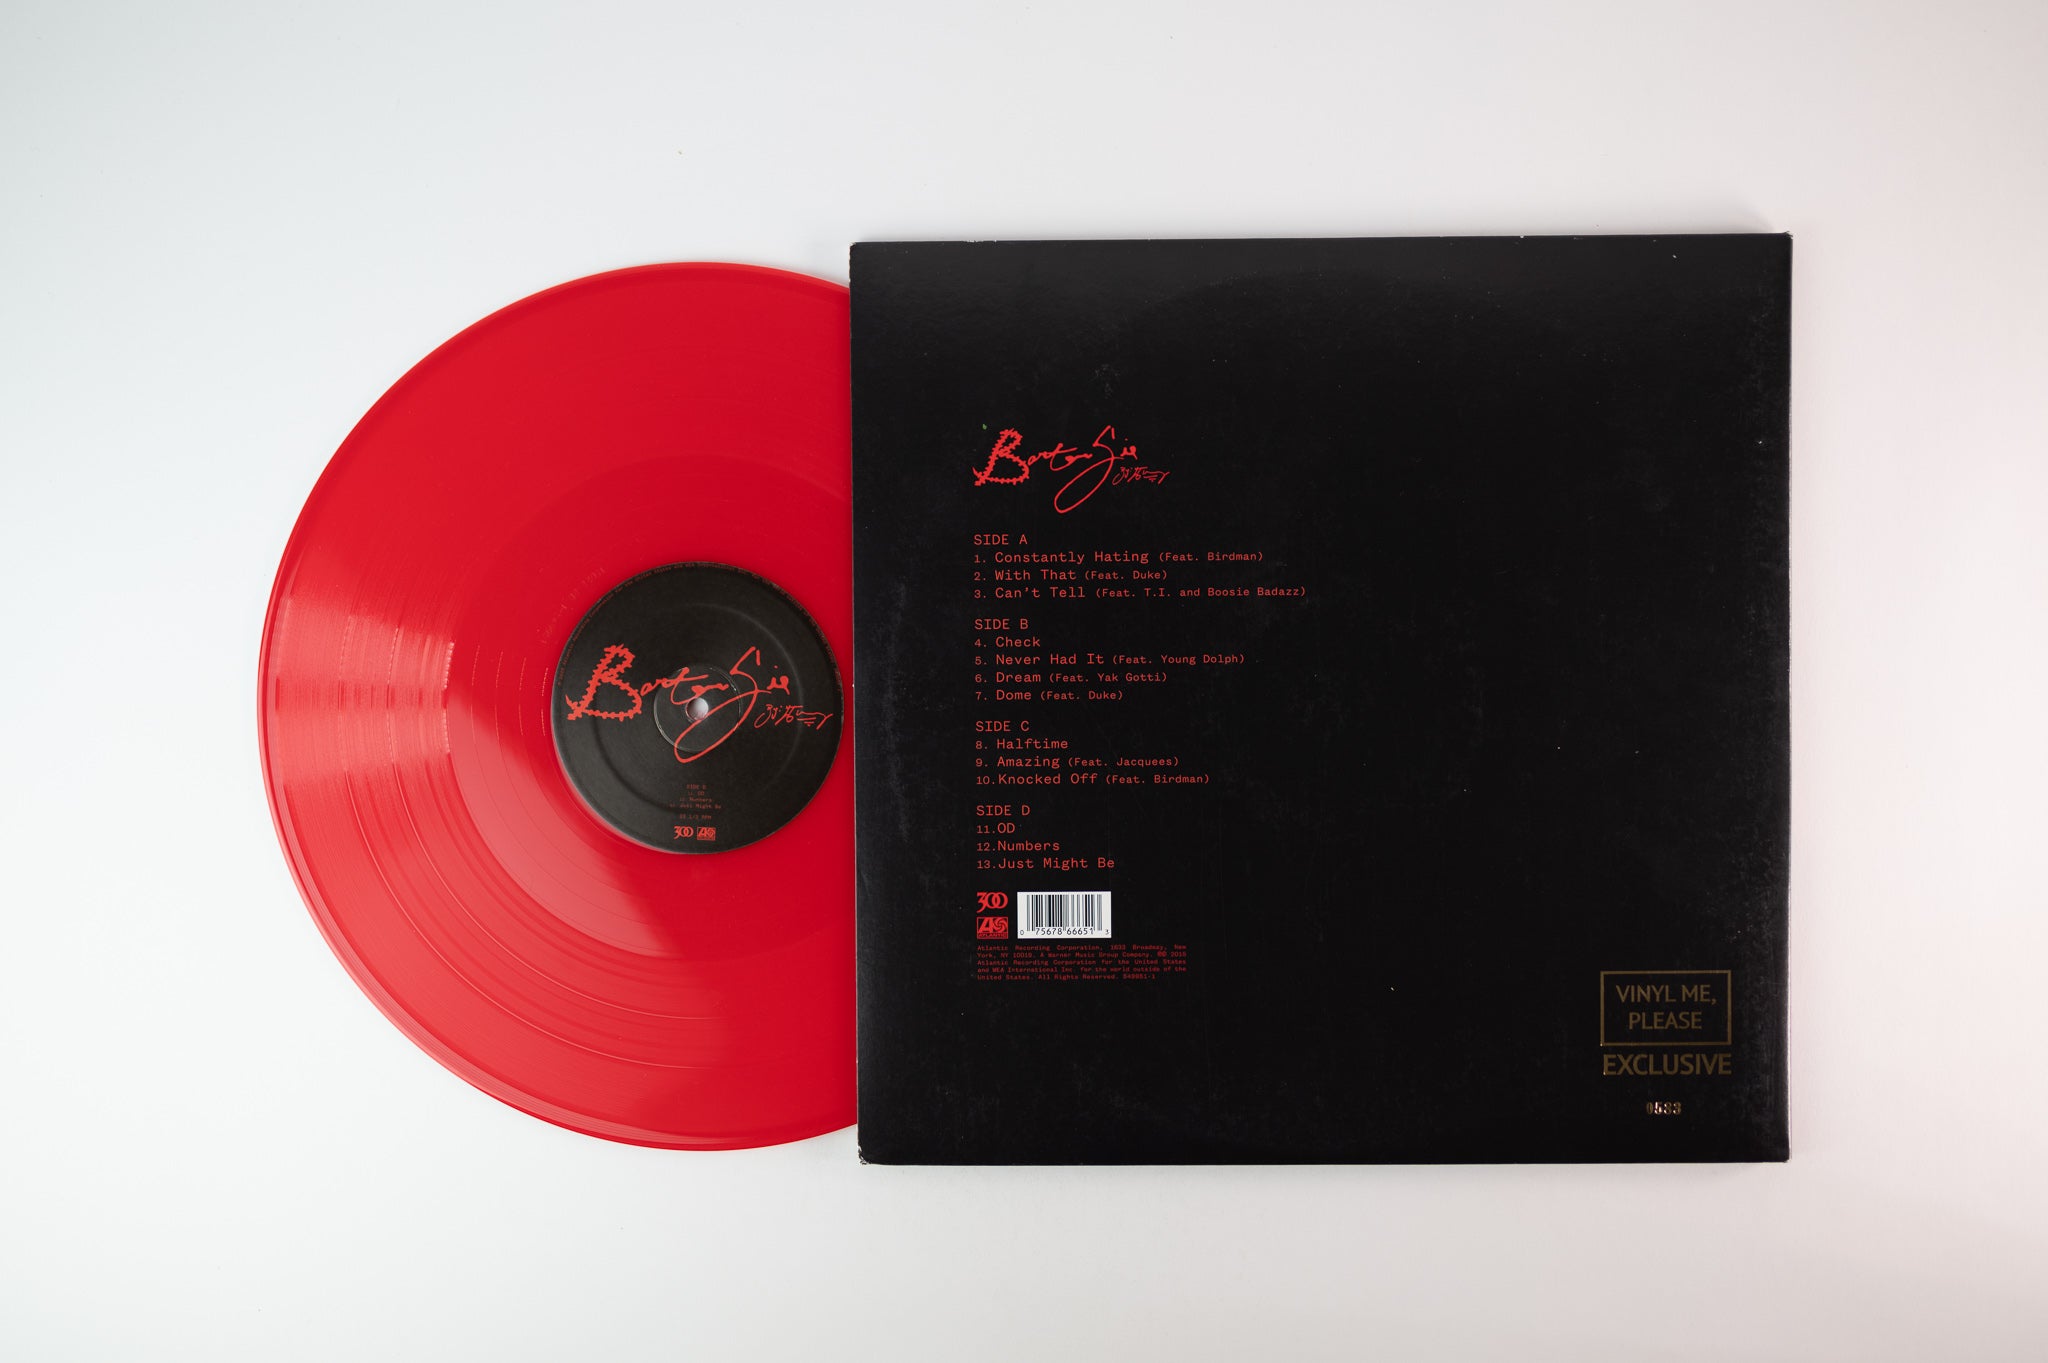 Young Thug - Barter 6 Vinyl Me Please Limited Red Vinyl Numbered